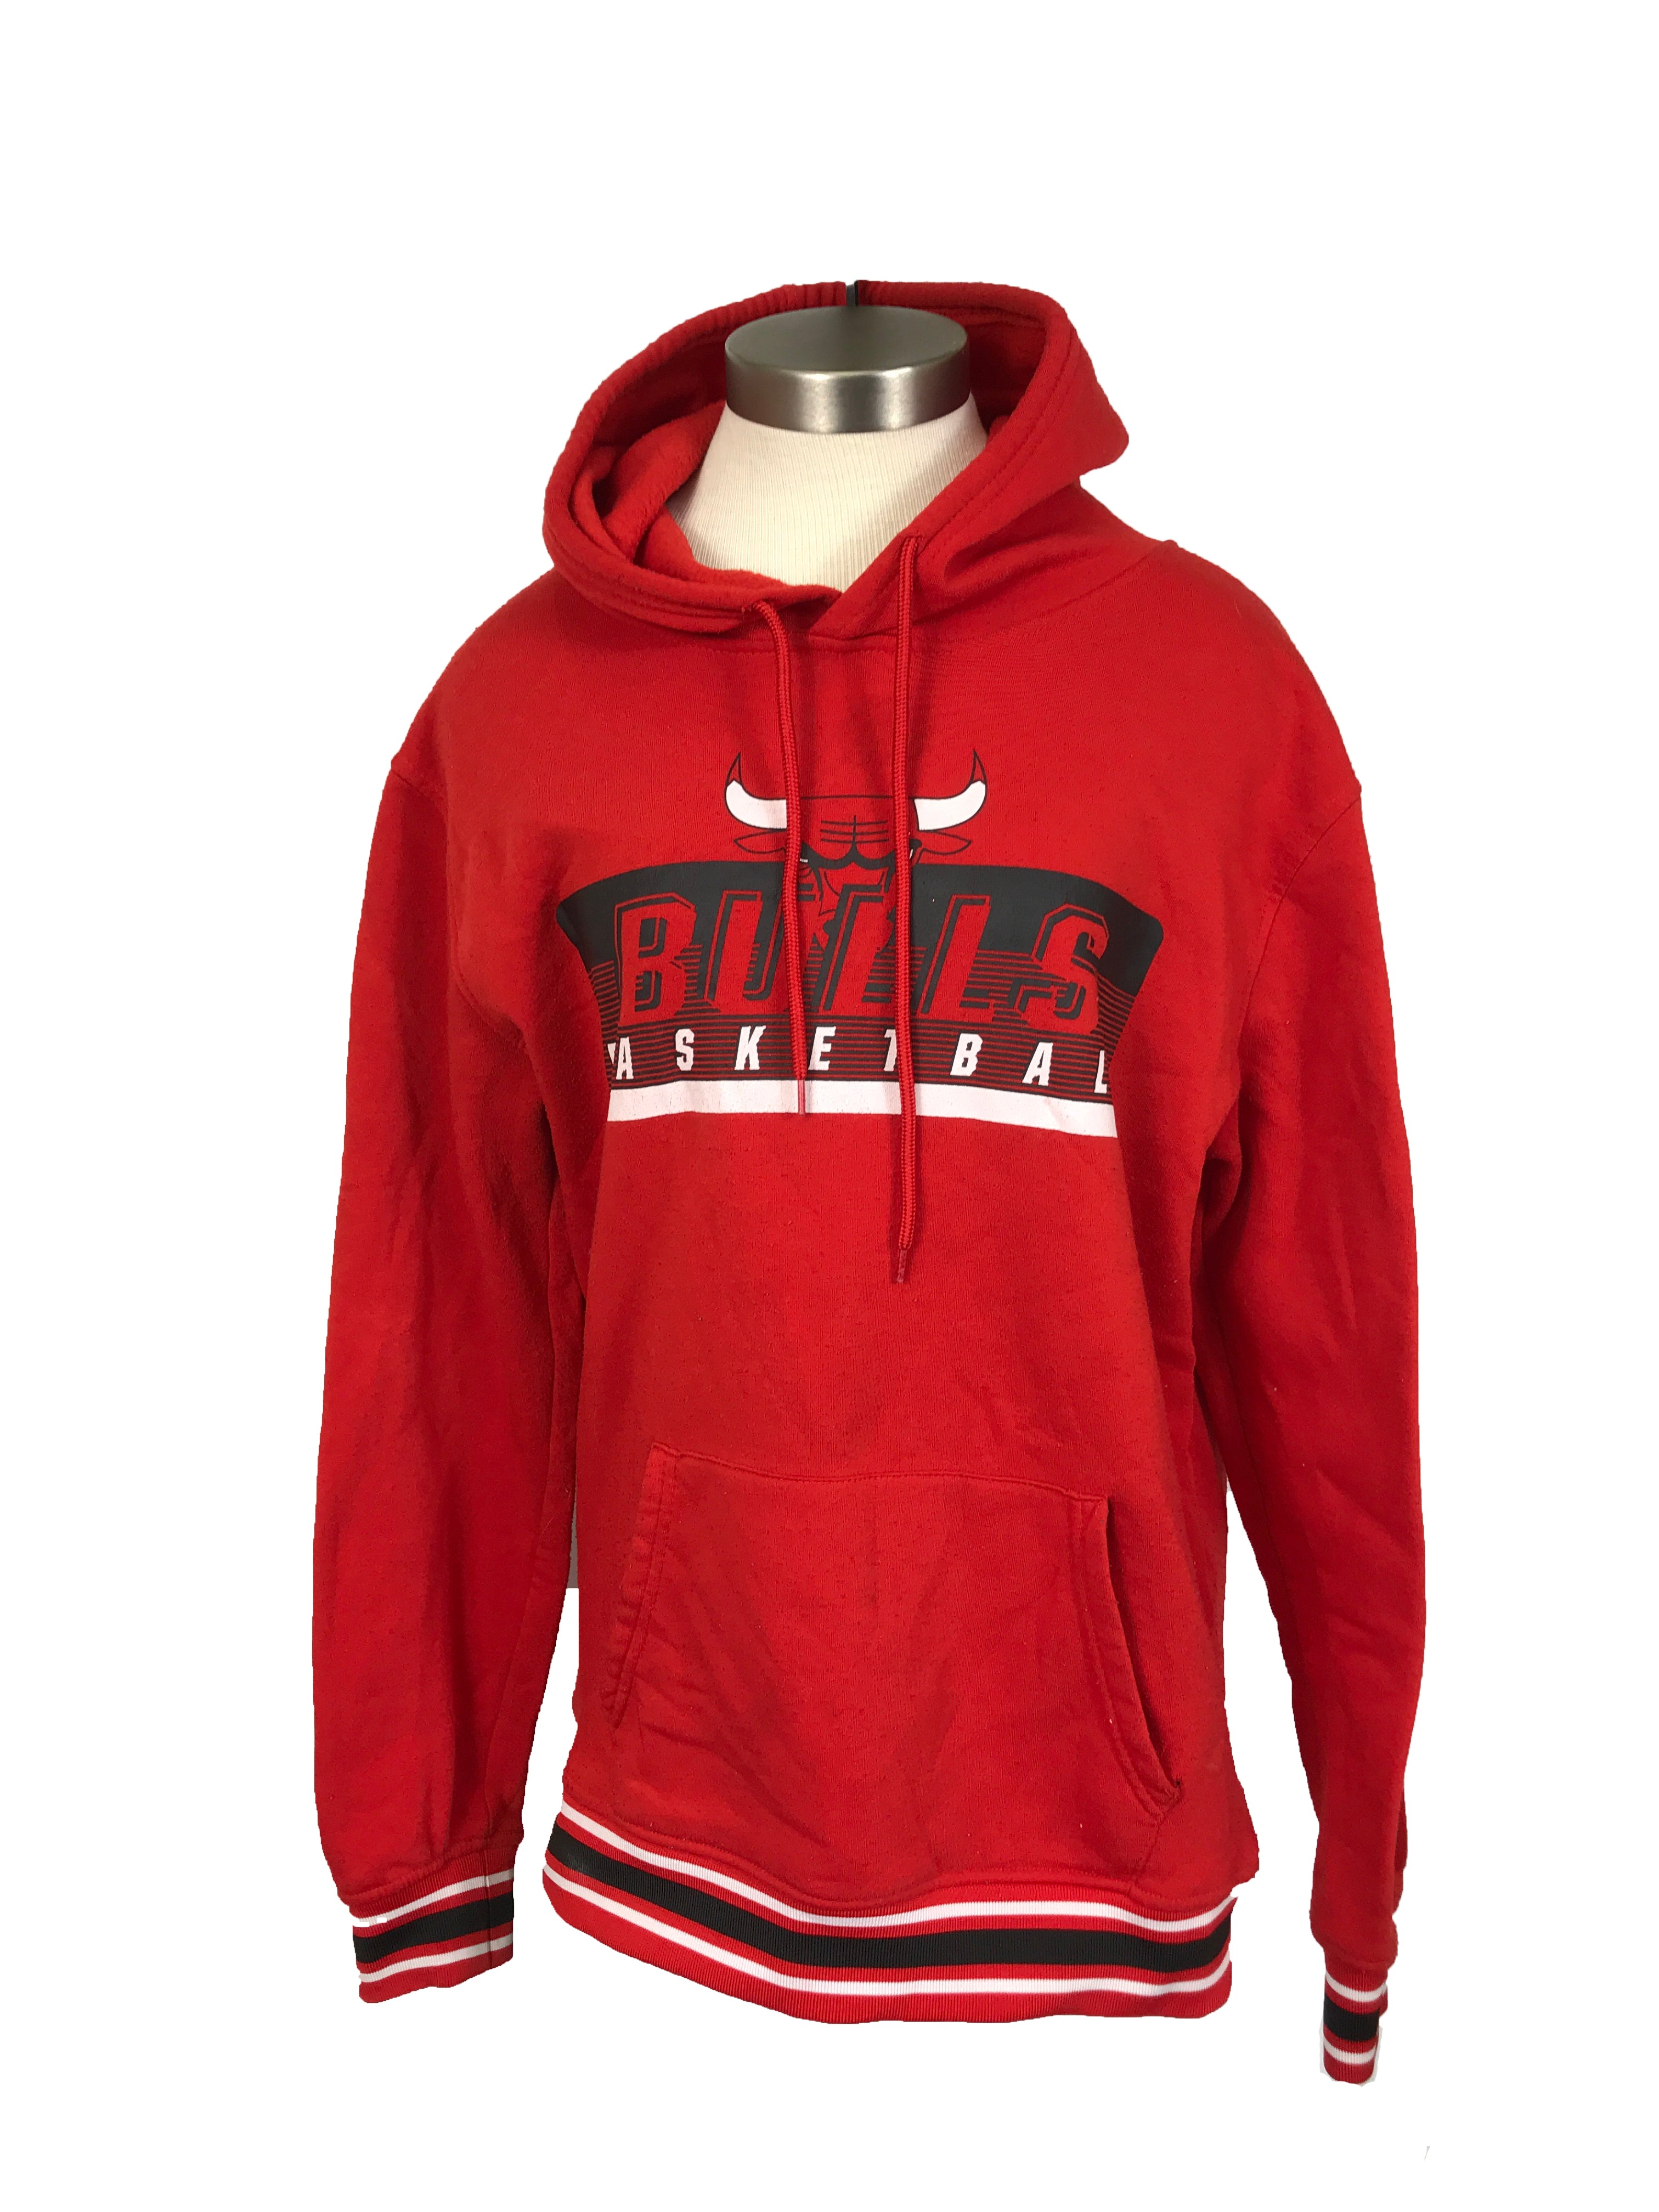 Chicago Bulls Basketball Red Hoodie Unisex Size M